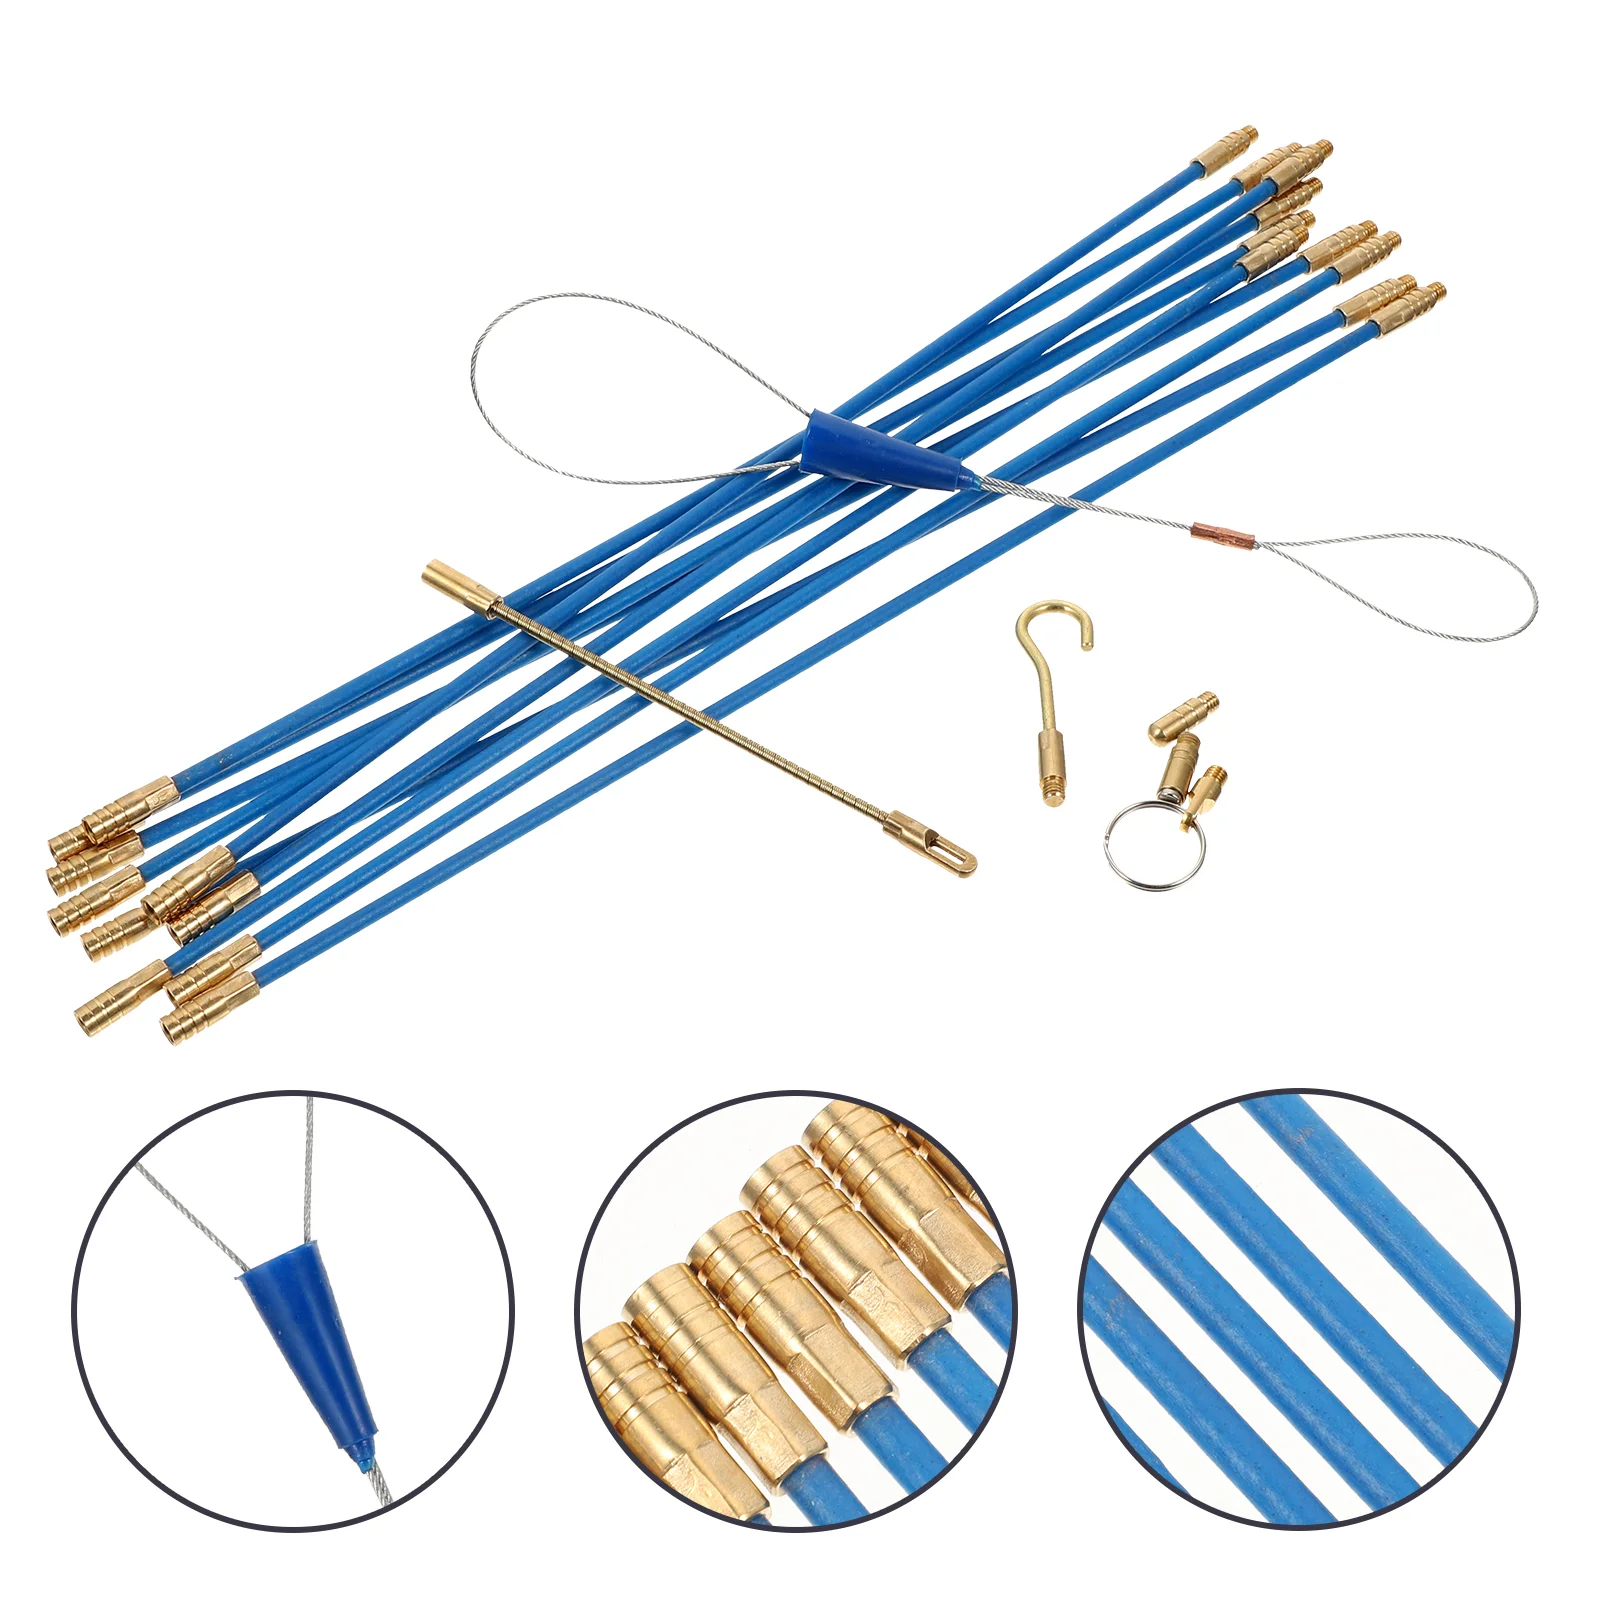 

Threader Electrical Wire Pull Kit Fish Tape Push Fishing Cable Coaxial Running Copper Rods Tools